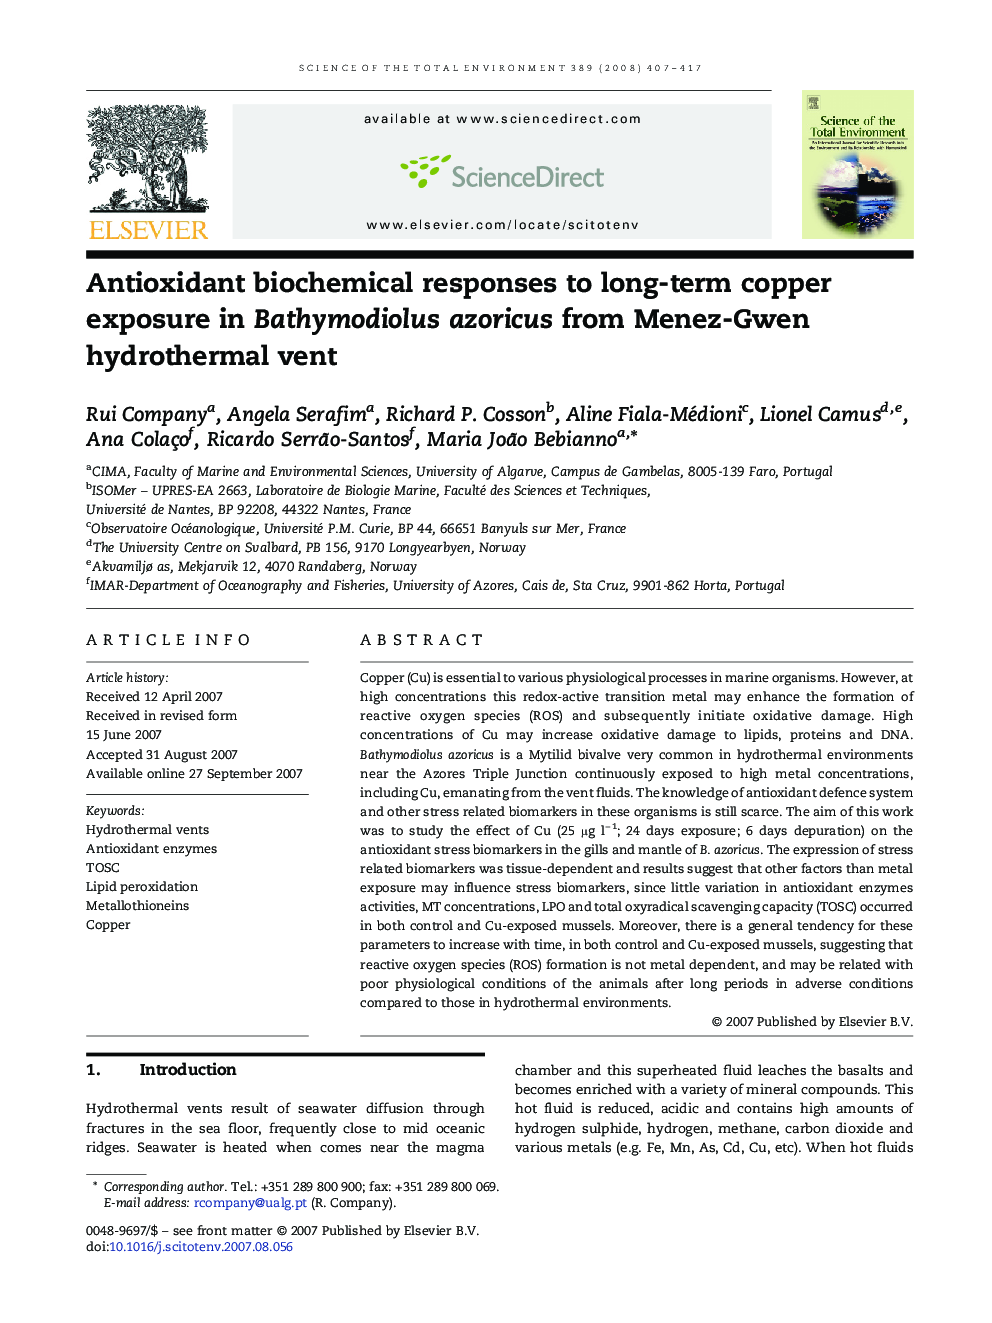 Antioxidant biochemical responses to long-term copper exposure in Bathymodiolus azoricus from Menez-Gwen hydrothermal vent